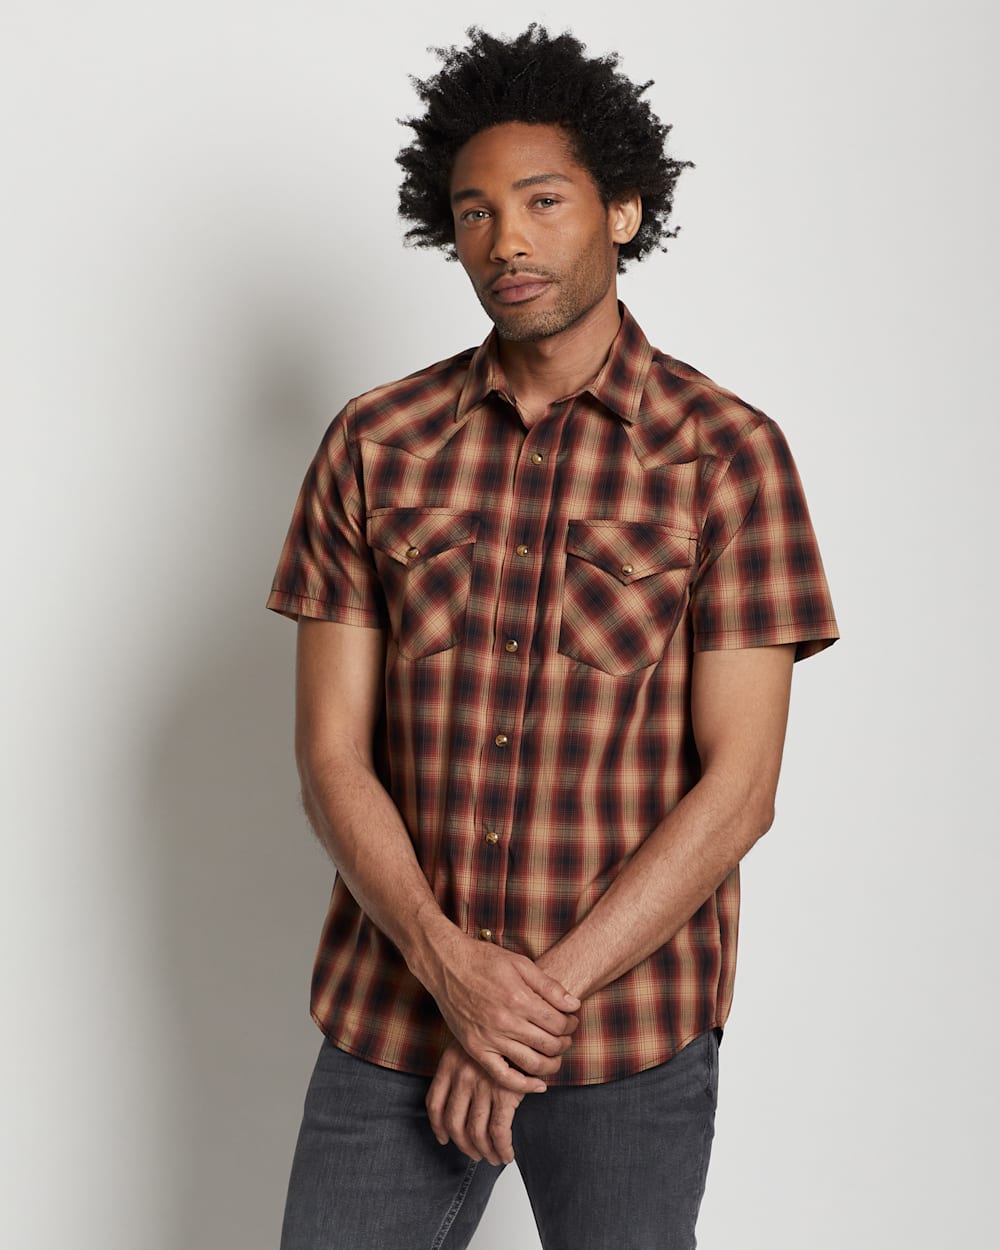 ALTERNATE VIEW OF MEN'S SHORT-SLEEVE FRONTIER SHIRT IN RED/TAN/BLACK OMBRE image number 4